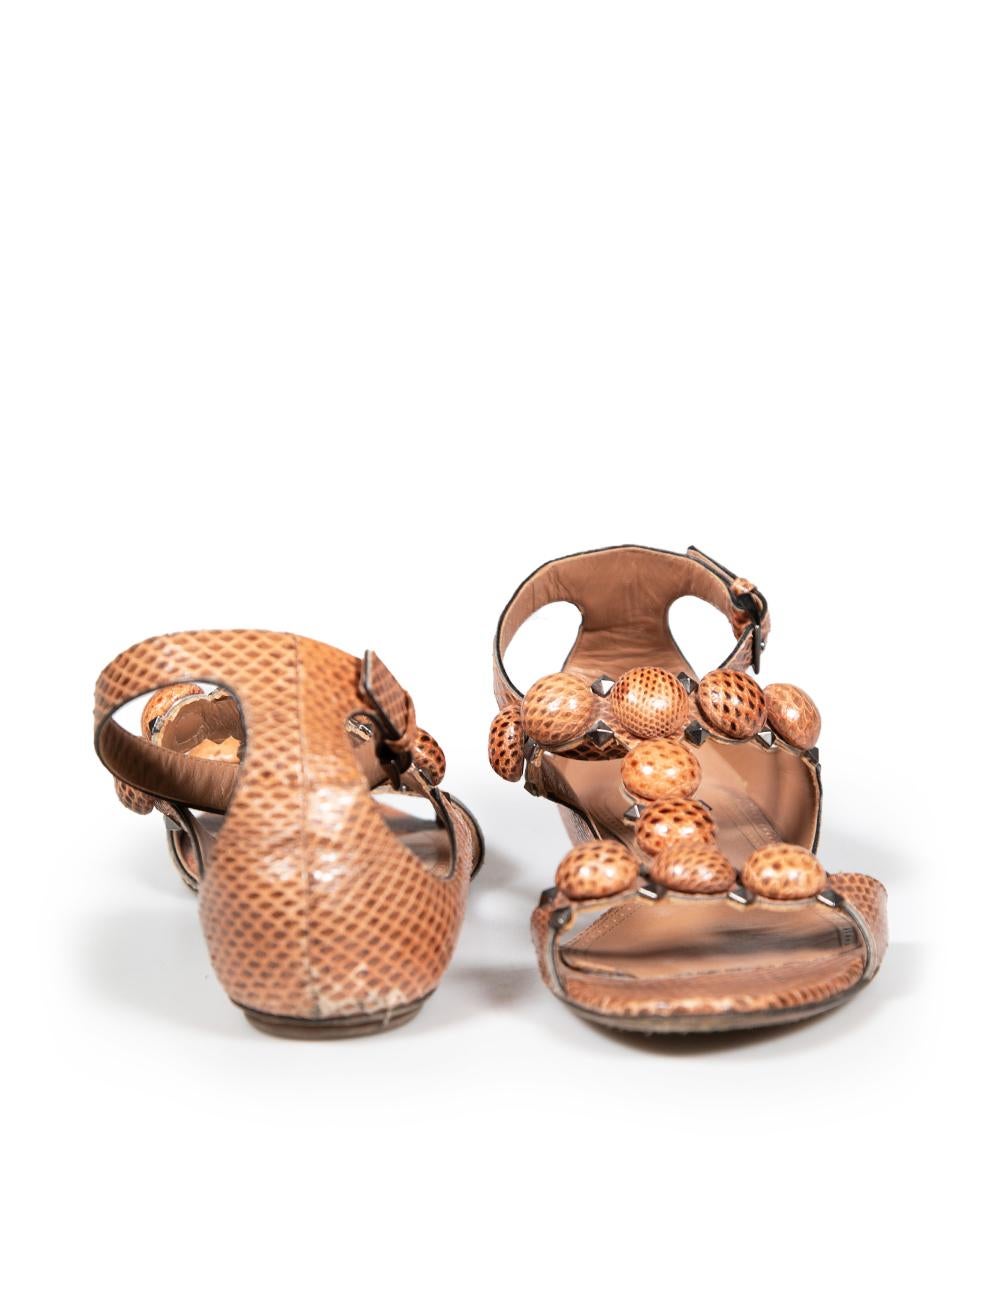 Azzedine Alaïa Brown Snakeskin Studded Sandals Size IT 40 In Good Condition For Sale In London, GB